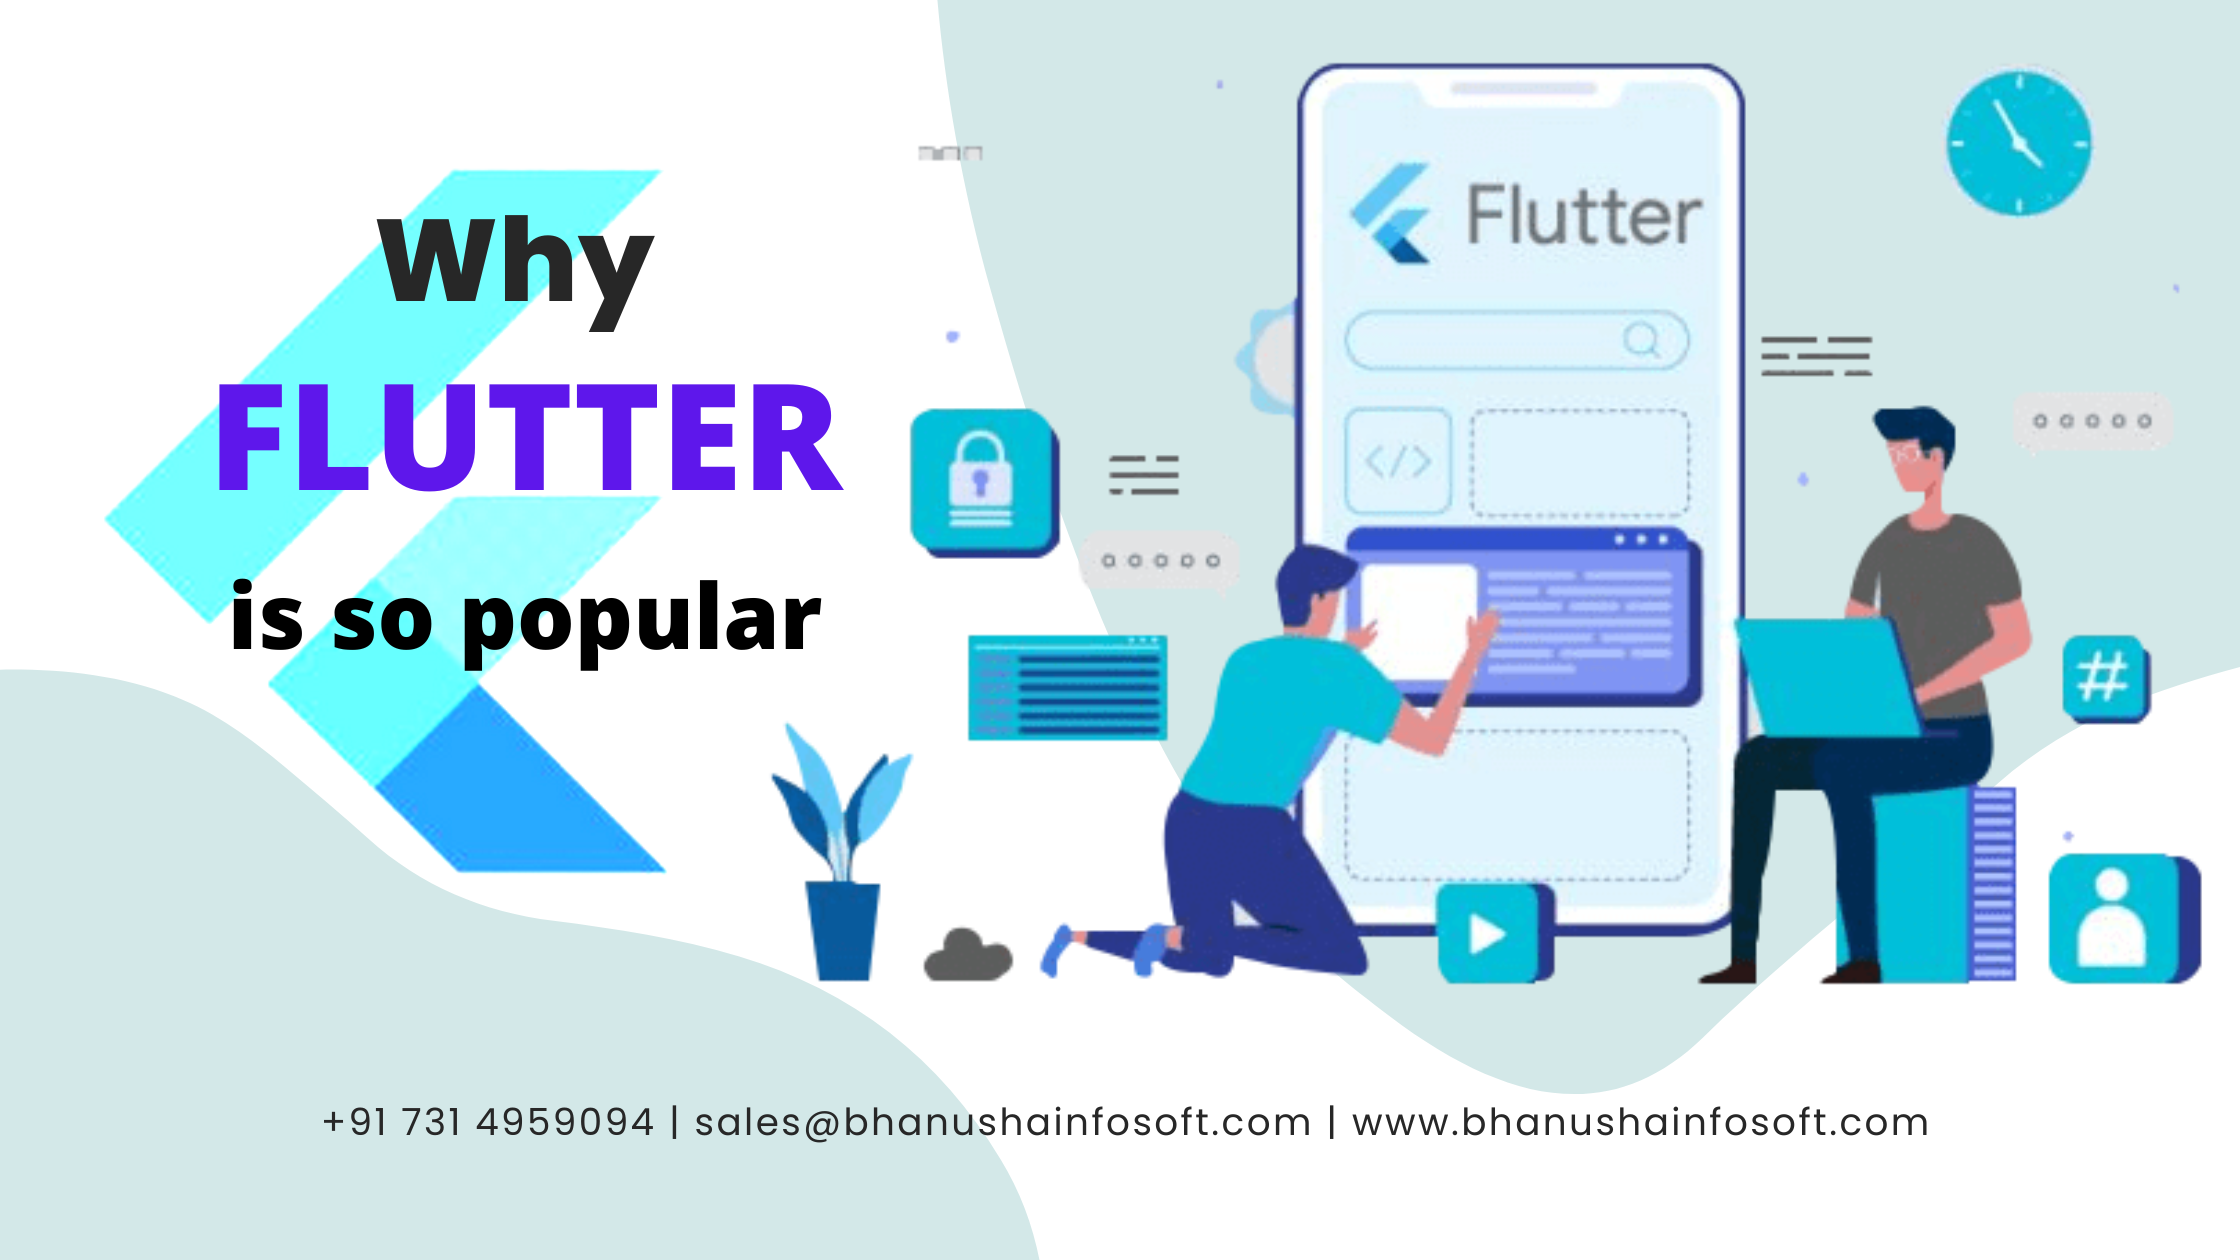 Why FLUTTER is so popular